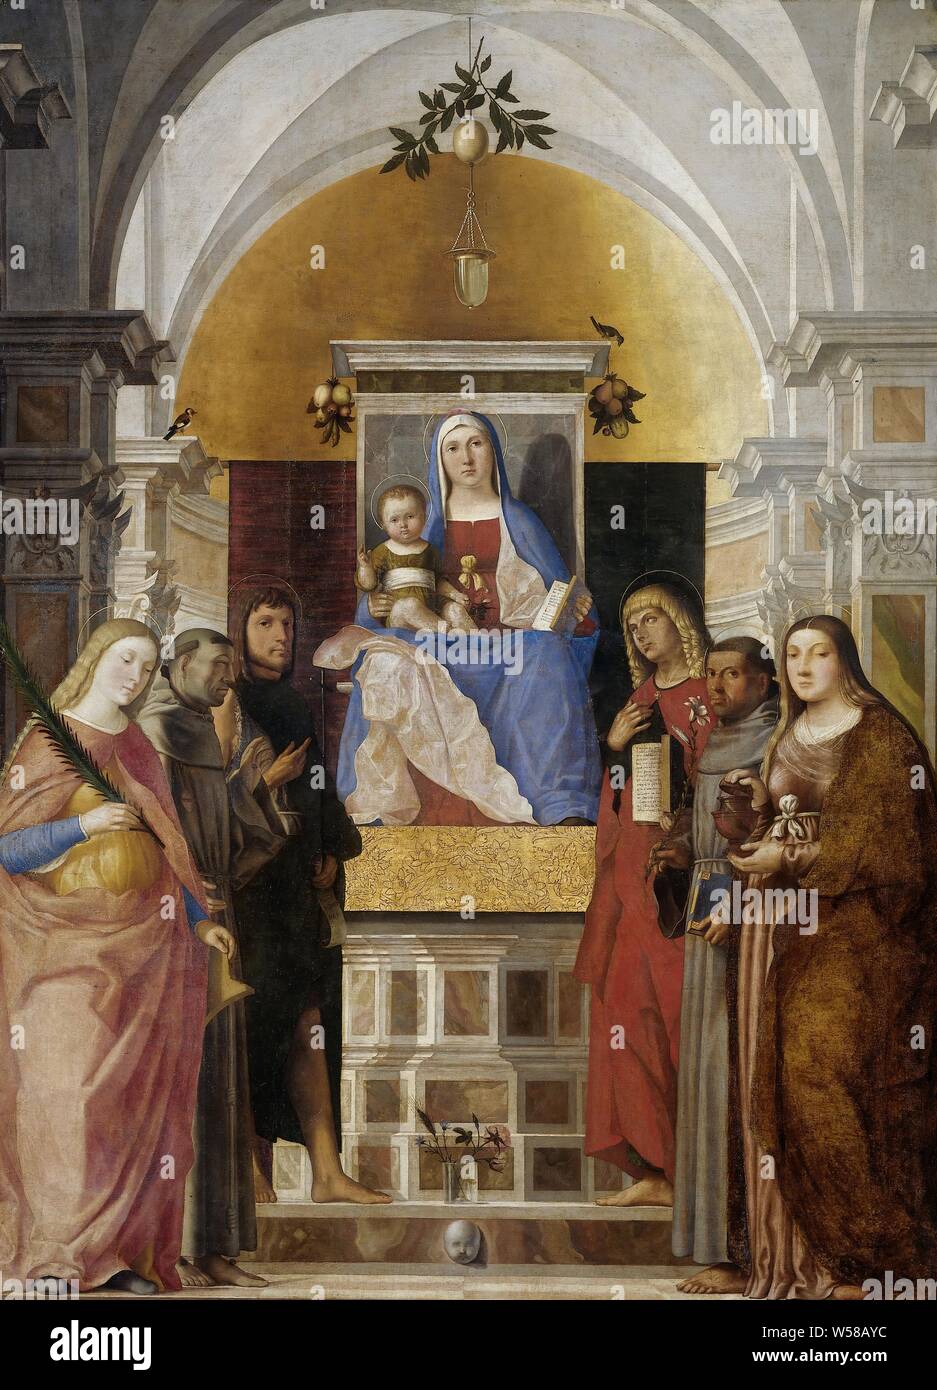 Madonna and Child with Sts Catherine, Francis of Assisi, John the Baptist, John the Evangelist, Antony of Padua and Mary Magdalene, Mary with child and saints. Church interior with in the middle Mary with the Christ child and a book sitting on his lap on a raised throne. Saints Catherine, Francis and John the Baptist on the left. On the right the saints Mary Magdalene, Anthony of Padua and John the Evangelist. On the step before the throne is a glass vase with some flowers, at the corners of the throne are bunches of fruit., Marcello Fogolino, 1510 - 1520, canvas, oil paint (paint), h 266 cm Stock Photo